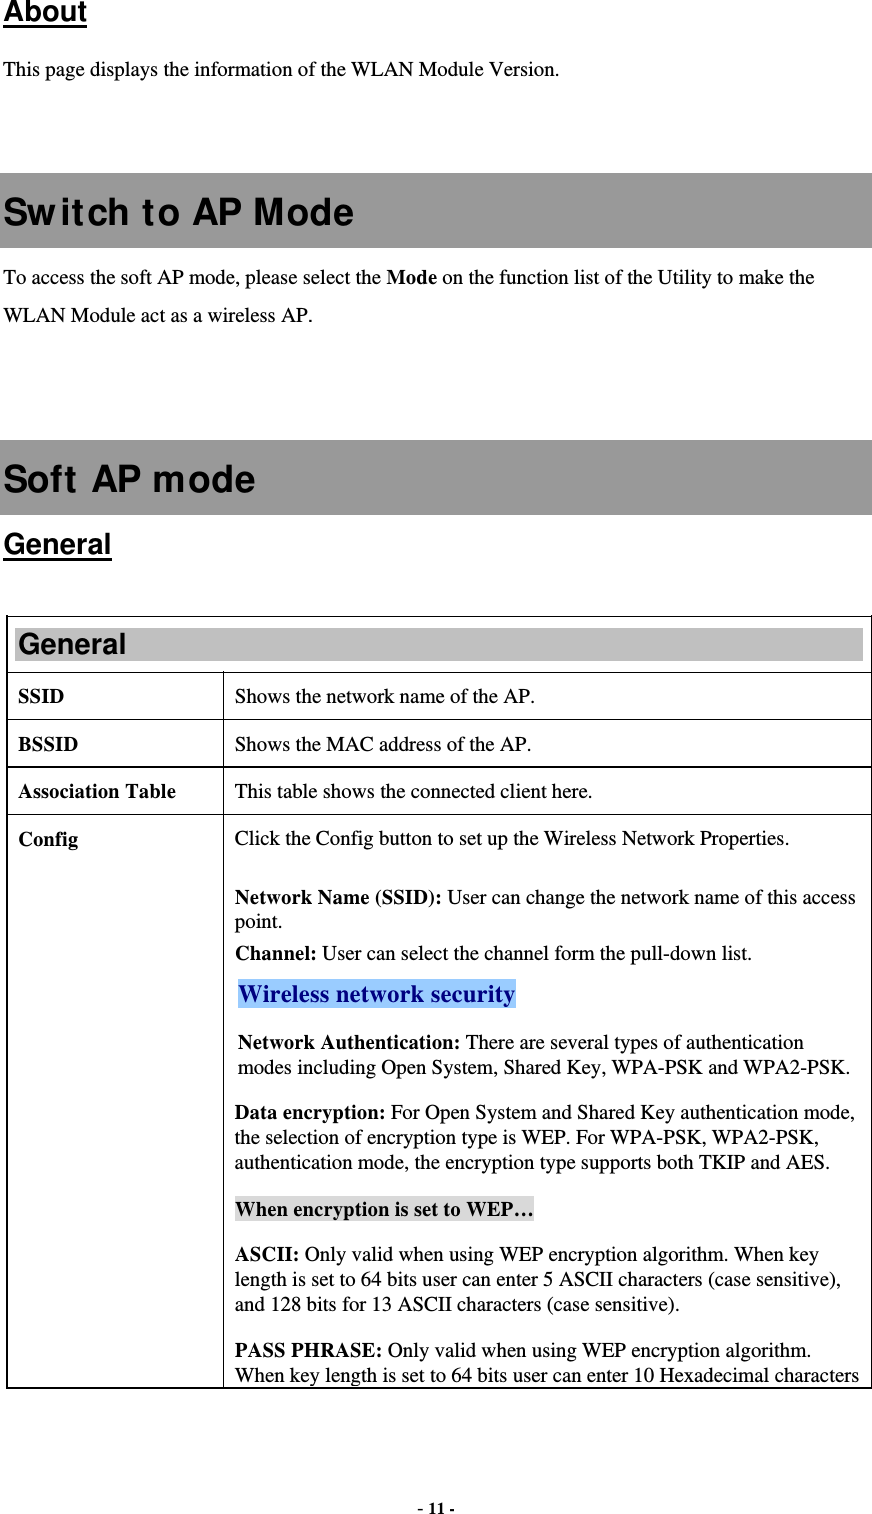  - 11 -  About This page displays the information of the WLAN Module Version.   Sw itch to AP Mode To access the soft AP mode, please select the Mode on the function list of the Utility to make the WLAN Module act as a wireless AP.   Soft AP mode General  General SSID   Shows the network name of the AP. BSSID  Shows the MAC address of the AP. Association Table  This table shows the connected client here. Config  Click the Config button to set up the Wireless Network Properties.  Network Name (SSID): User can change the network name of this access point. Channel: User can select the channel form the pull-down list. Wireless network security Network Authentication: There are several types of authentication modes including Open System, Shared Key, WPA-PSK and WPA2-PSK. Data encryption: For Open System and Shared Key authentication mode, the selection of encryption type is WEP. For WPA-PSK, WPA2-PSK, authentication mode, the encryption type supports both TKIP and AES. When encryption is set to WEP… ASCII: Only valid when using WEP encryption algorithm. When key length is set to 64 bits user can enter 5 ASCII characters (case sensitive), and 128 bits for 13 ASCII characters (case sensitive). PASS PHRASE: Only valid when using WEP encryption algorithm. When key length is set to 64 bits user can enter 10 Hexadecimal characters